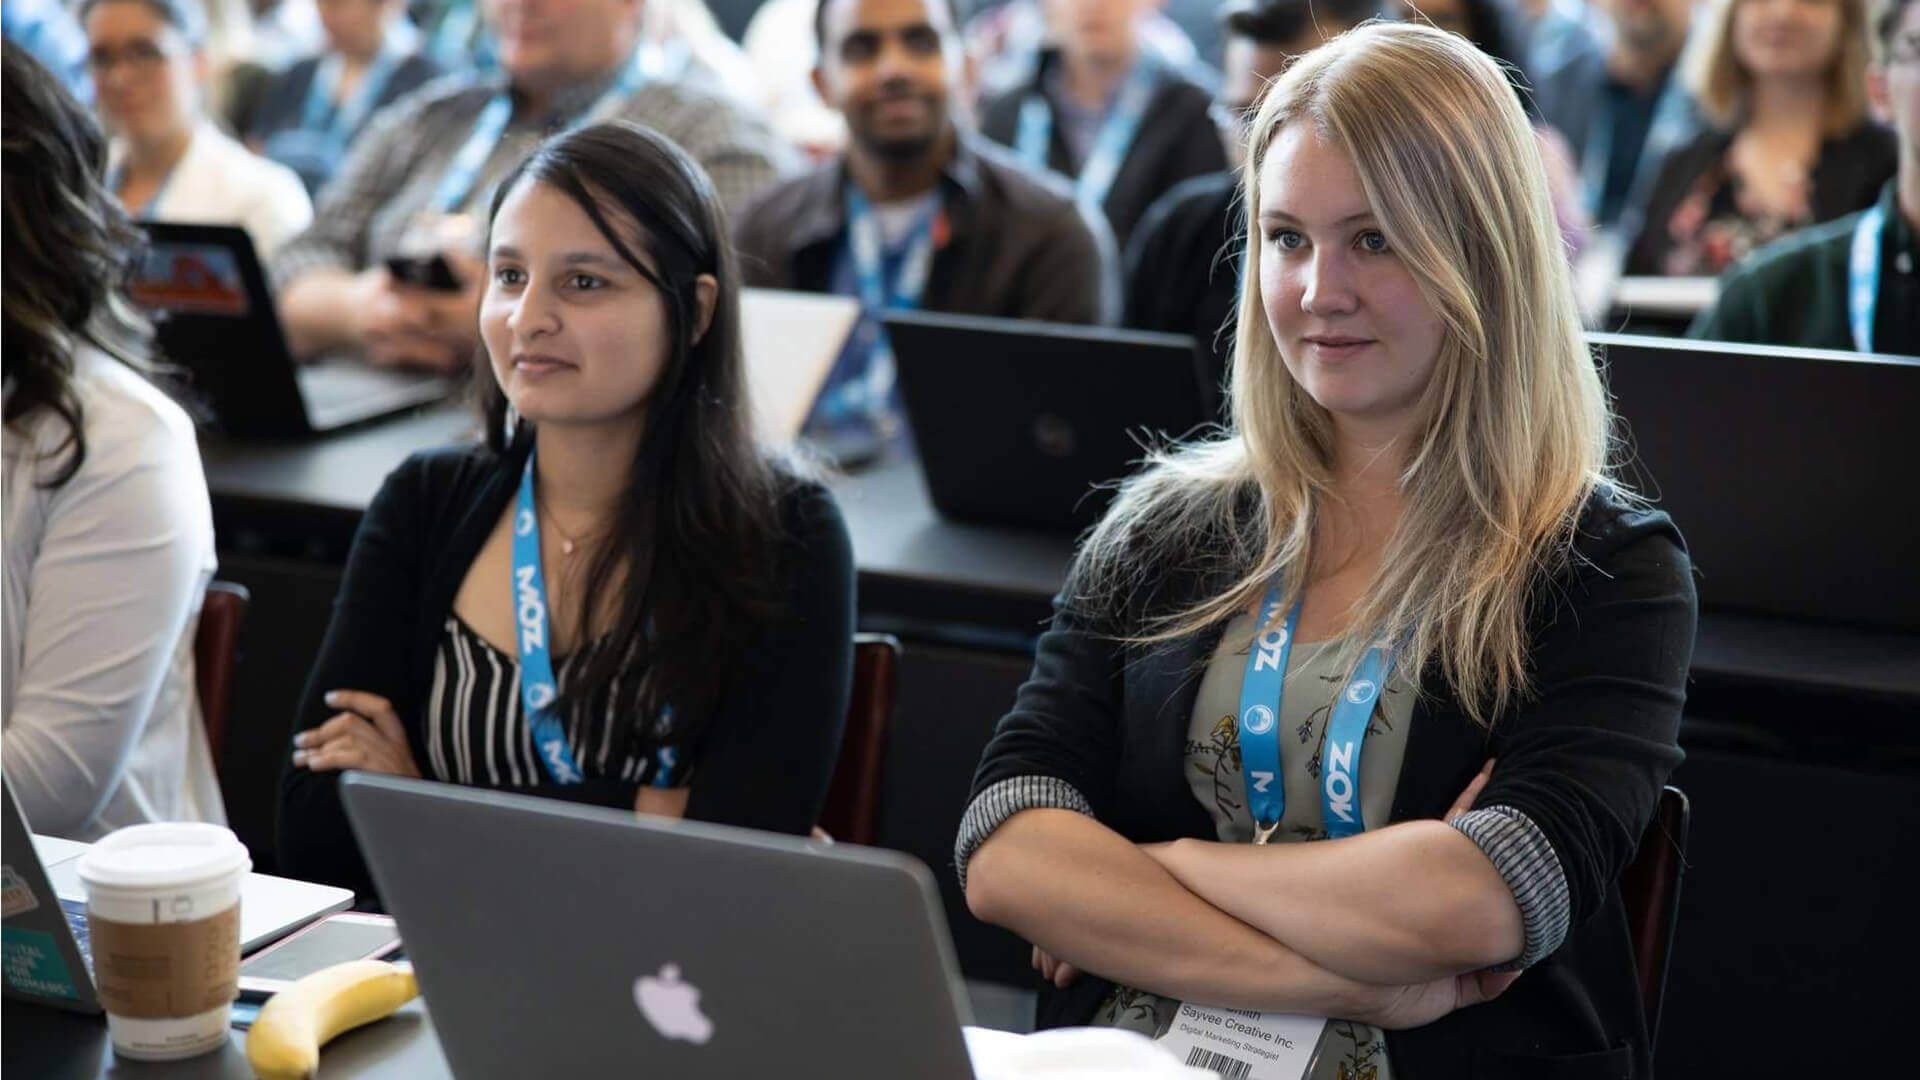 Sharpen your search marketing skills with an SMX workshop